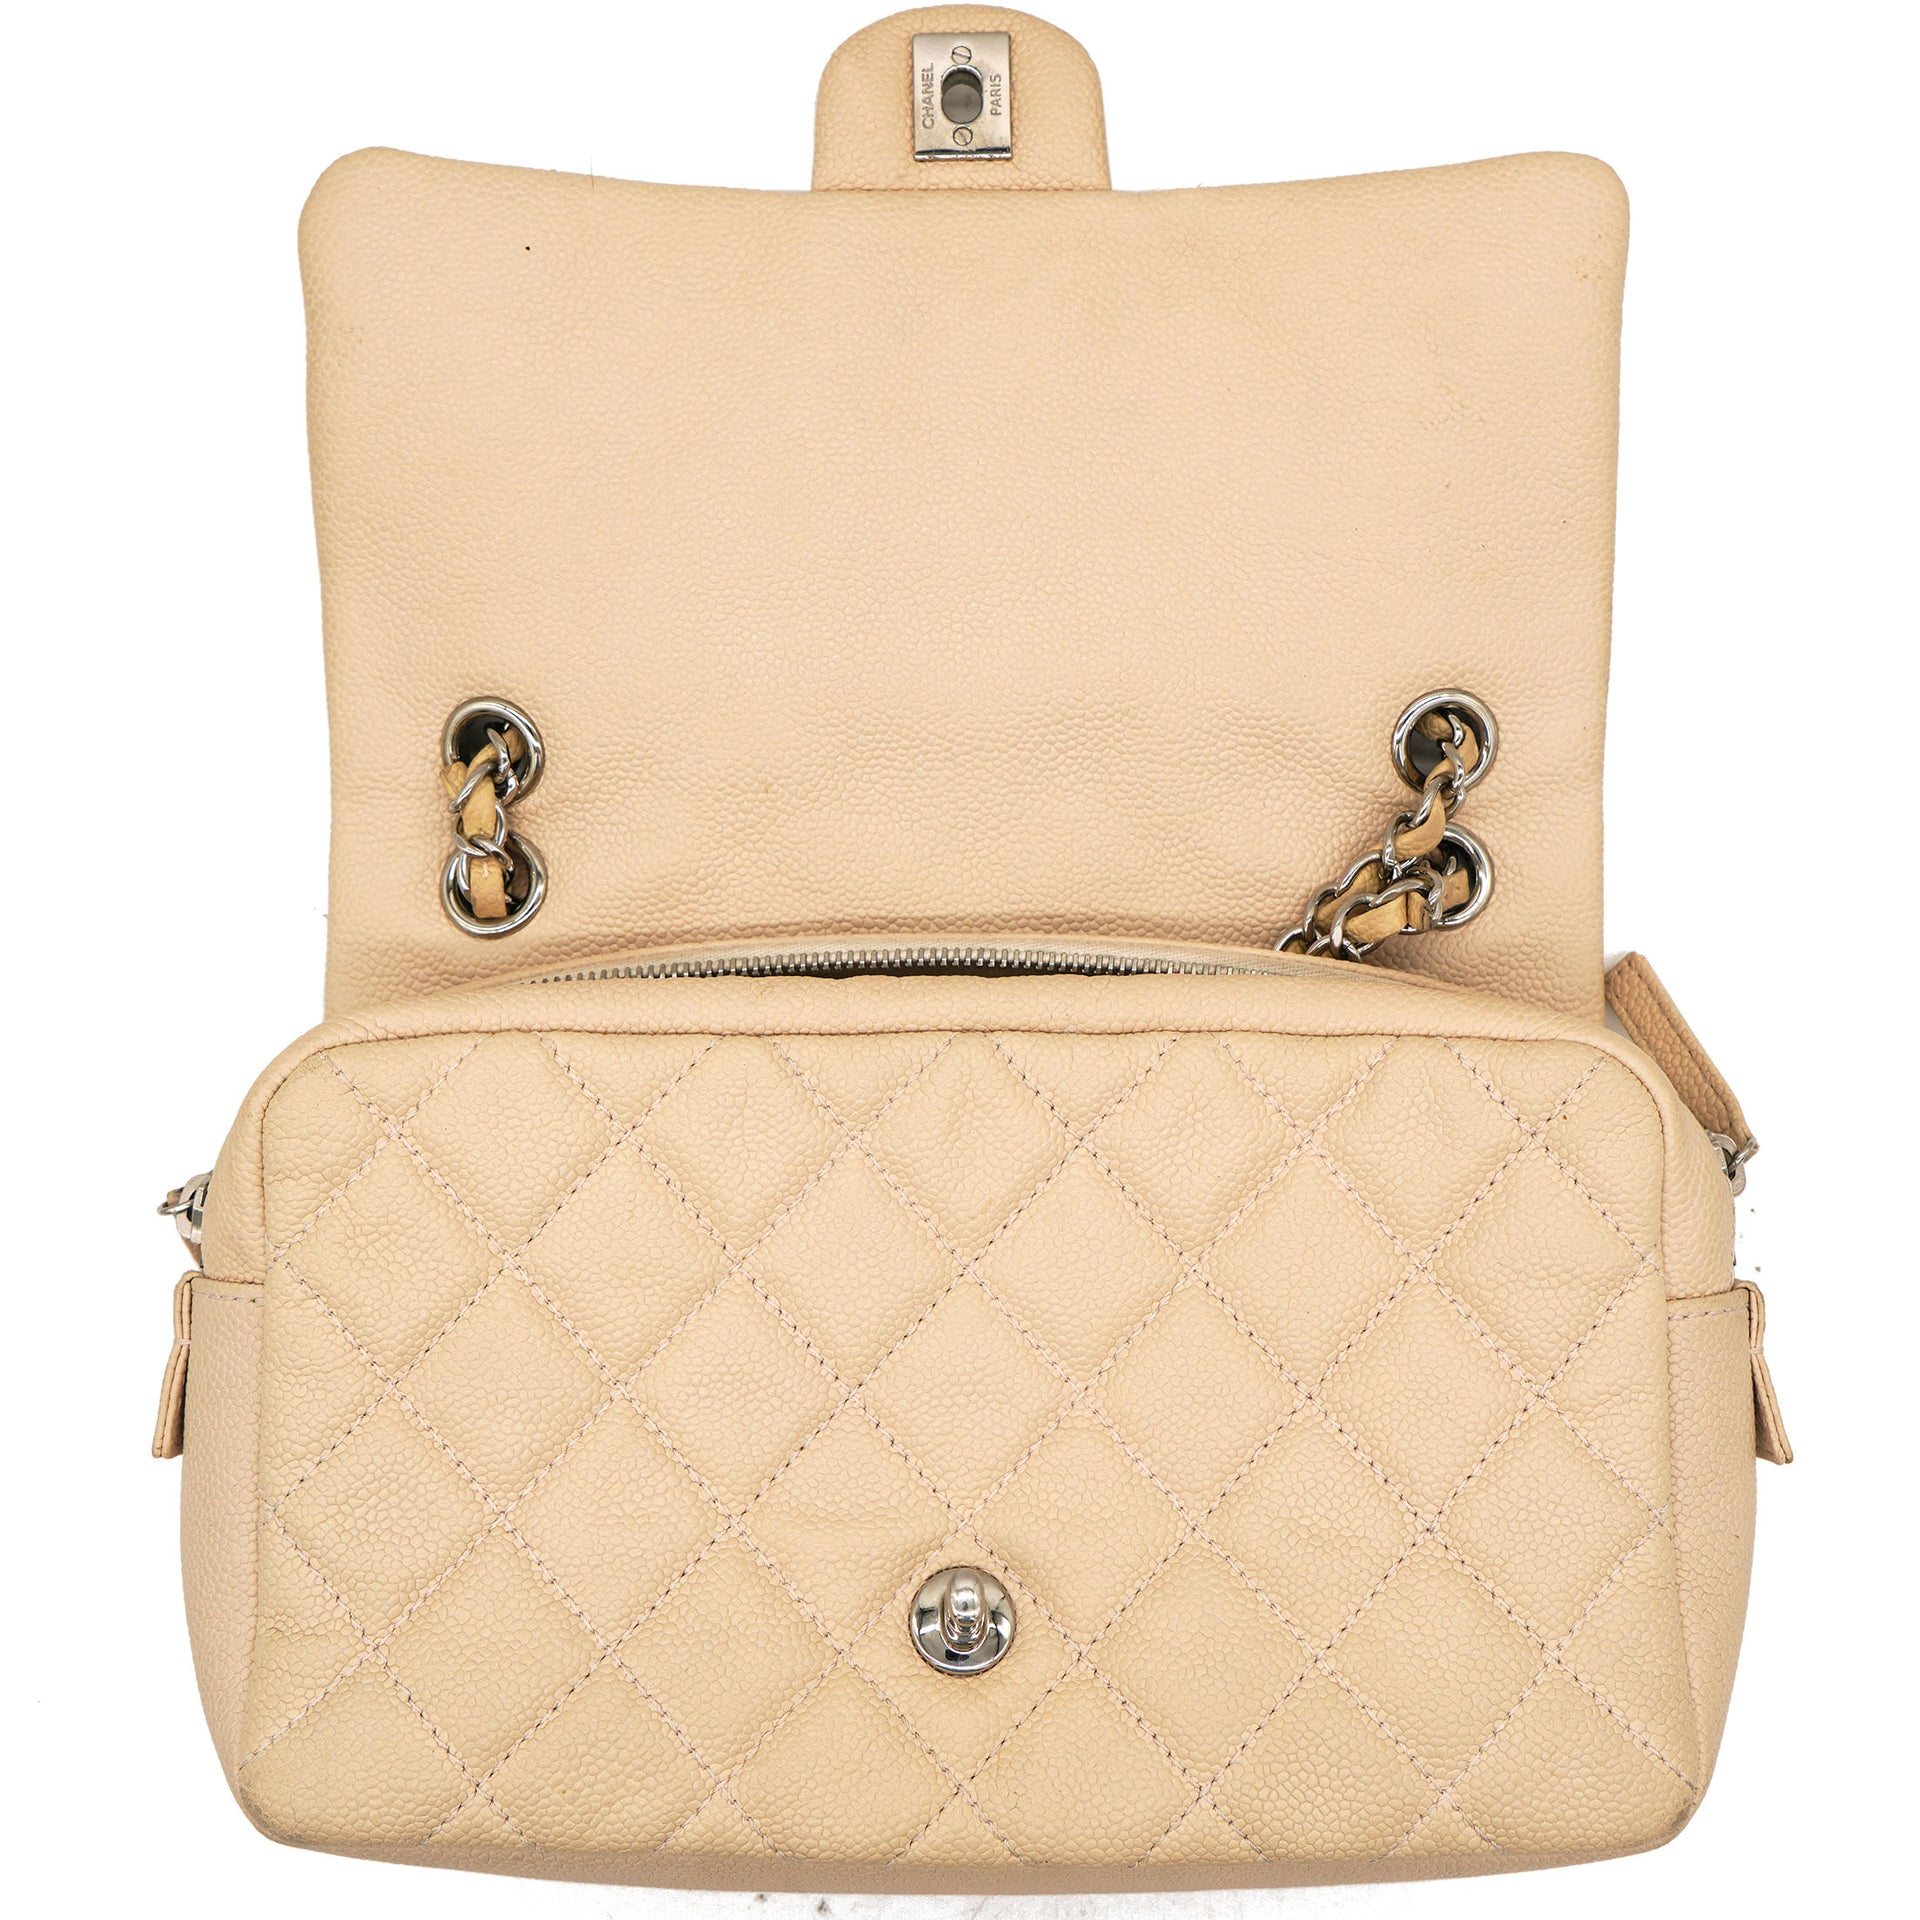 Light Beige Quilted Caviar Leather Camera Flap Bag